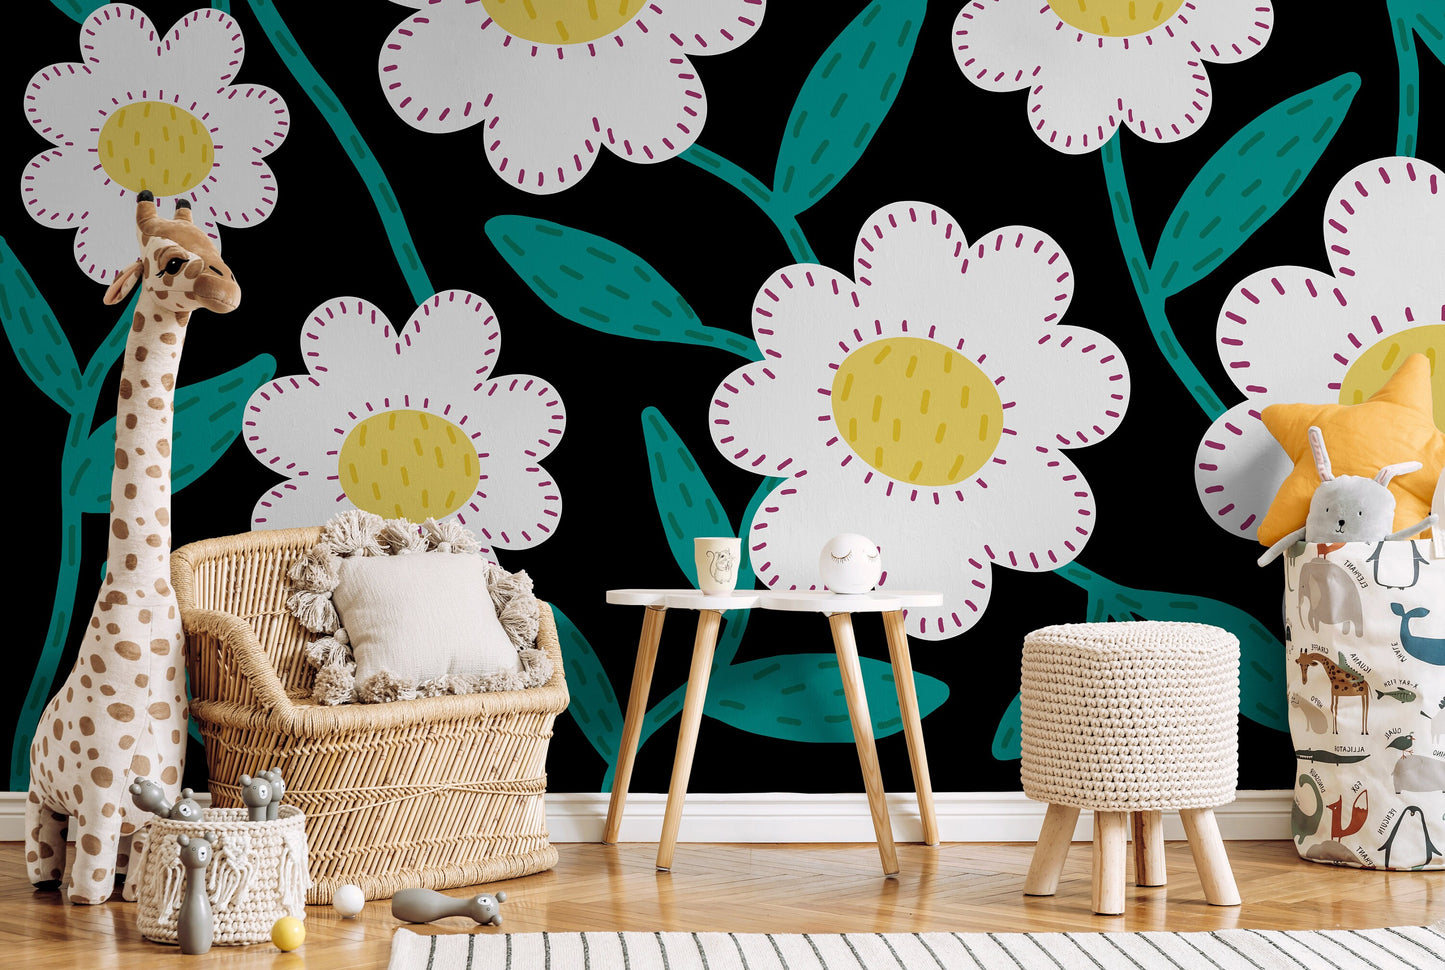 Wallpaper Peel and Stick Wallpaper Removable Wallpaper Home Decor Wall Art Wall Decor Room Decor / Daisy Floral Wallpaper - C472